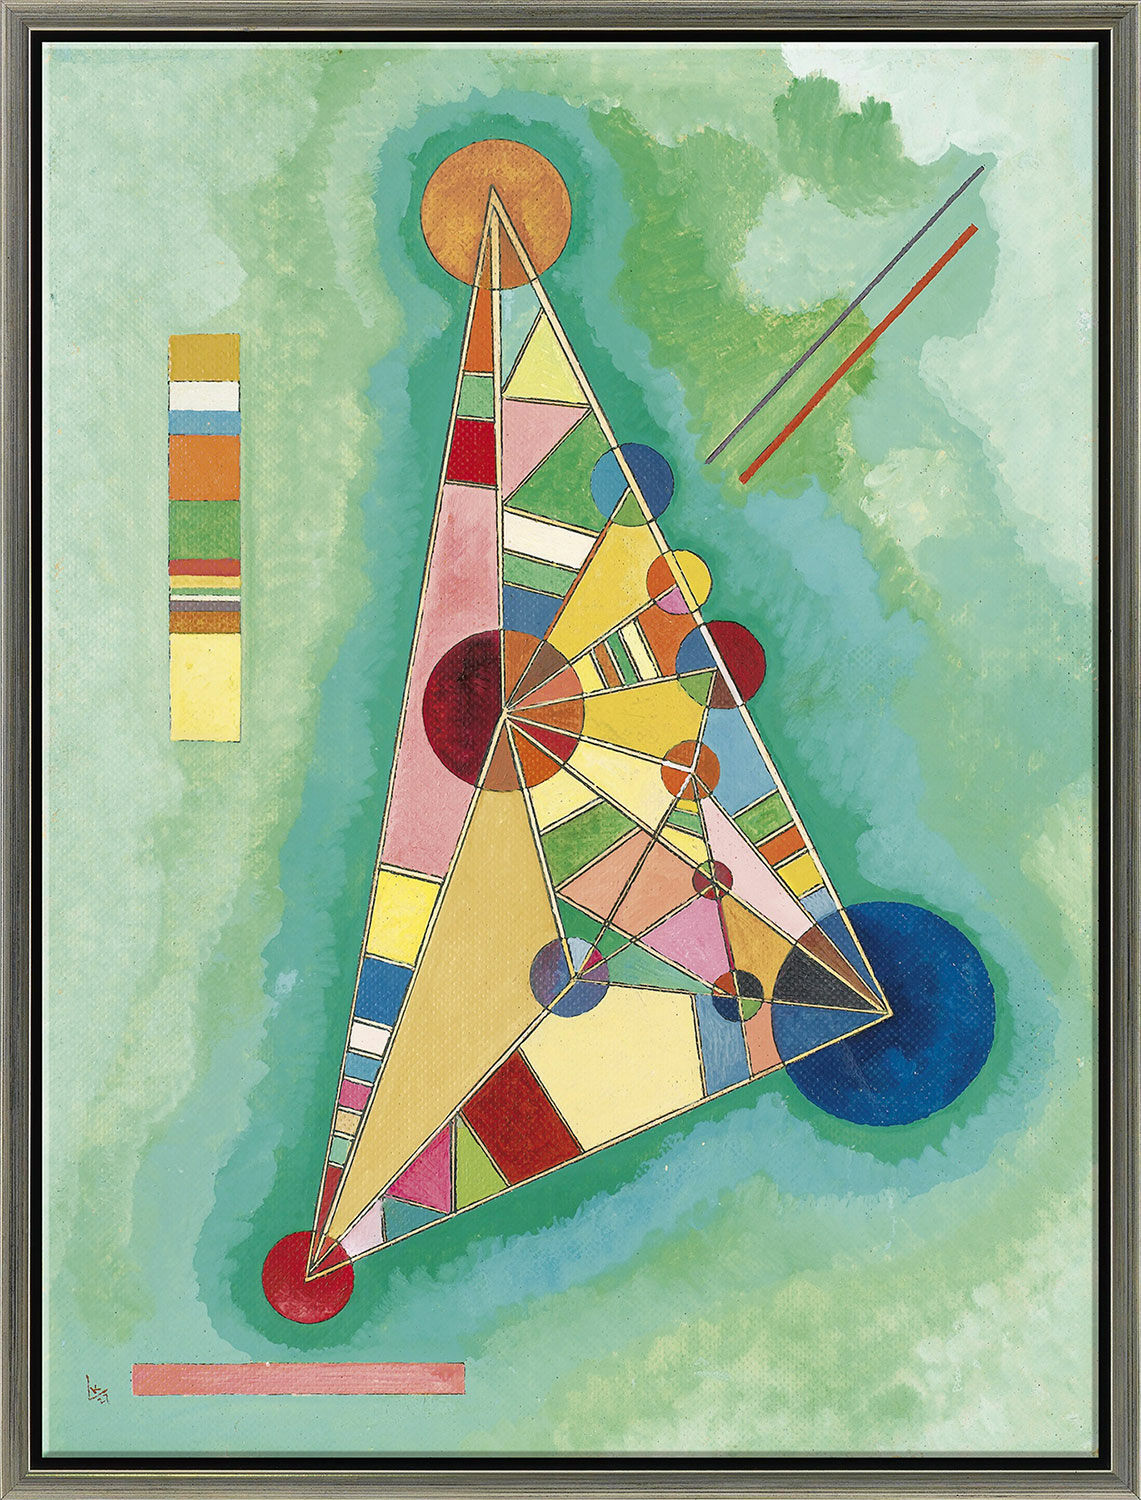 Picture "Colour Triangle" (1927), framed by Wassily Kandinsky